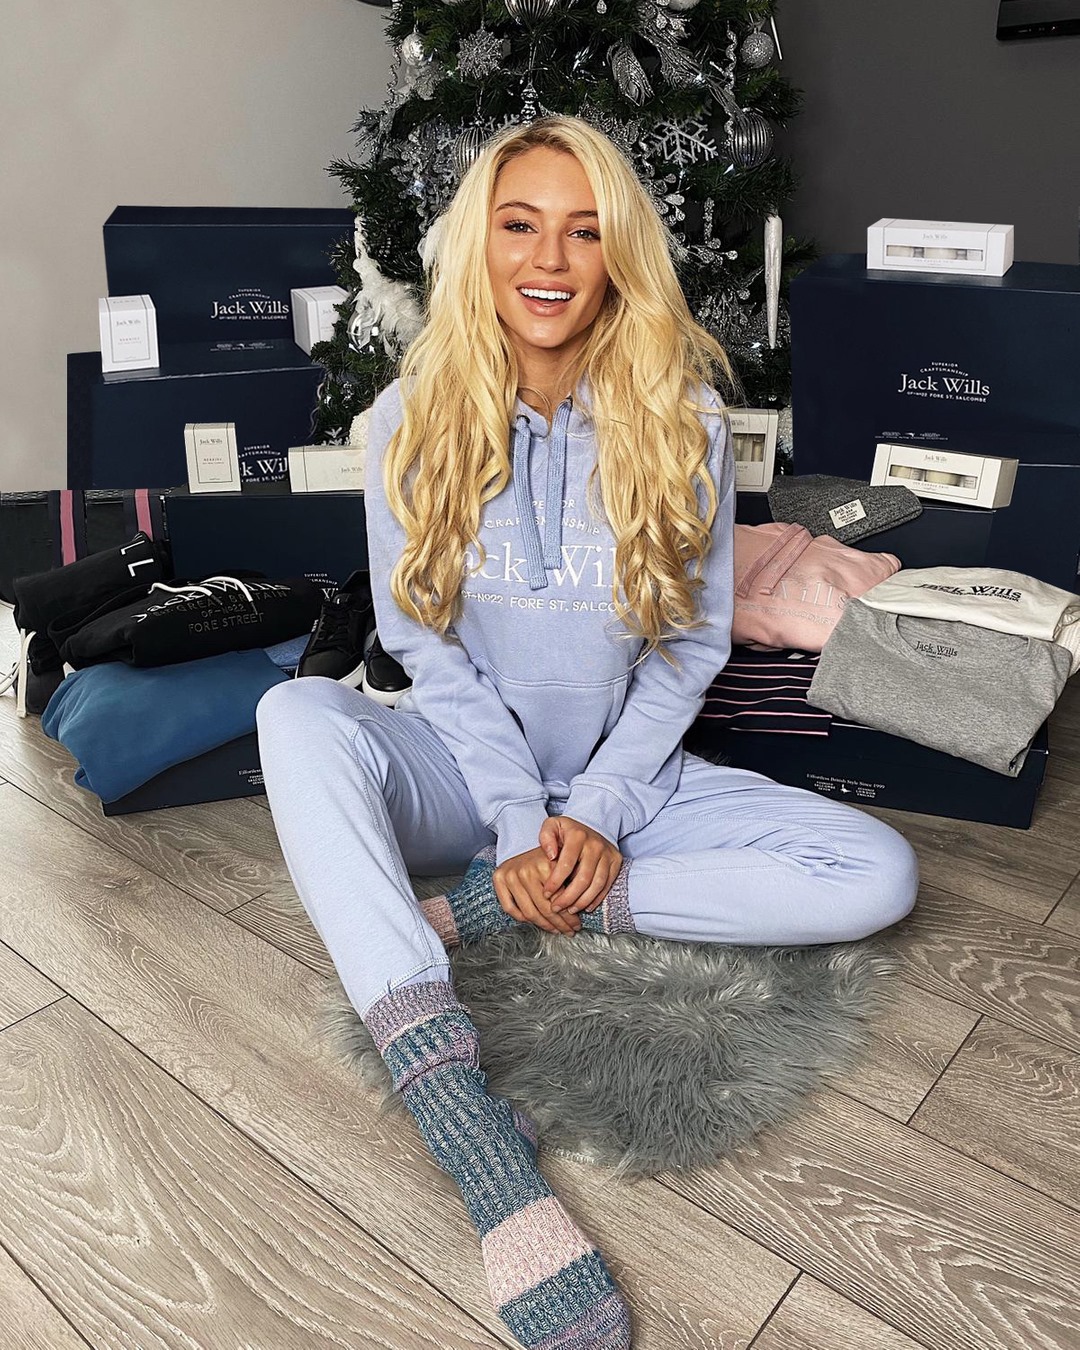 Who wants to WIN a NEW wardrobe for 2021!? We've teamed up with the lovely @lucierosedonlan to offer one lucky winner the chance to win £1000 worth of Jack Wills clothing and accessories of your choice!⠀⠀⠀⠀⠀⠀⠀⠀⠀